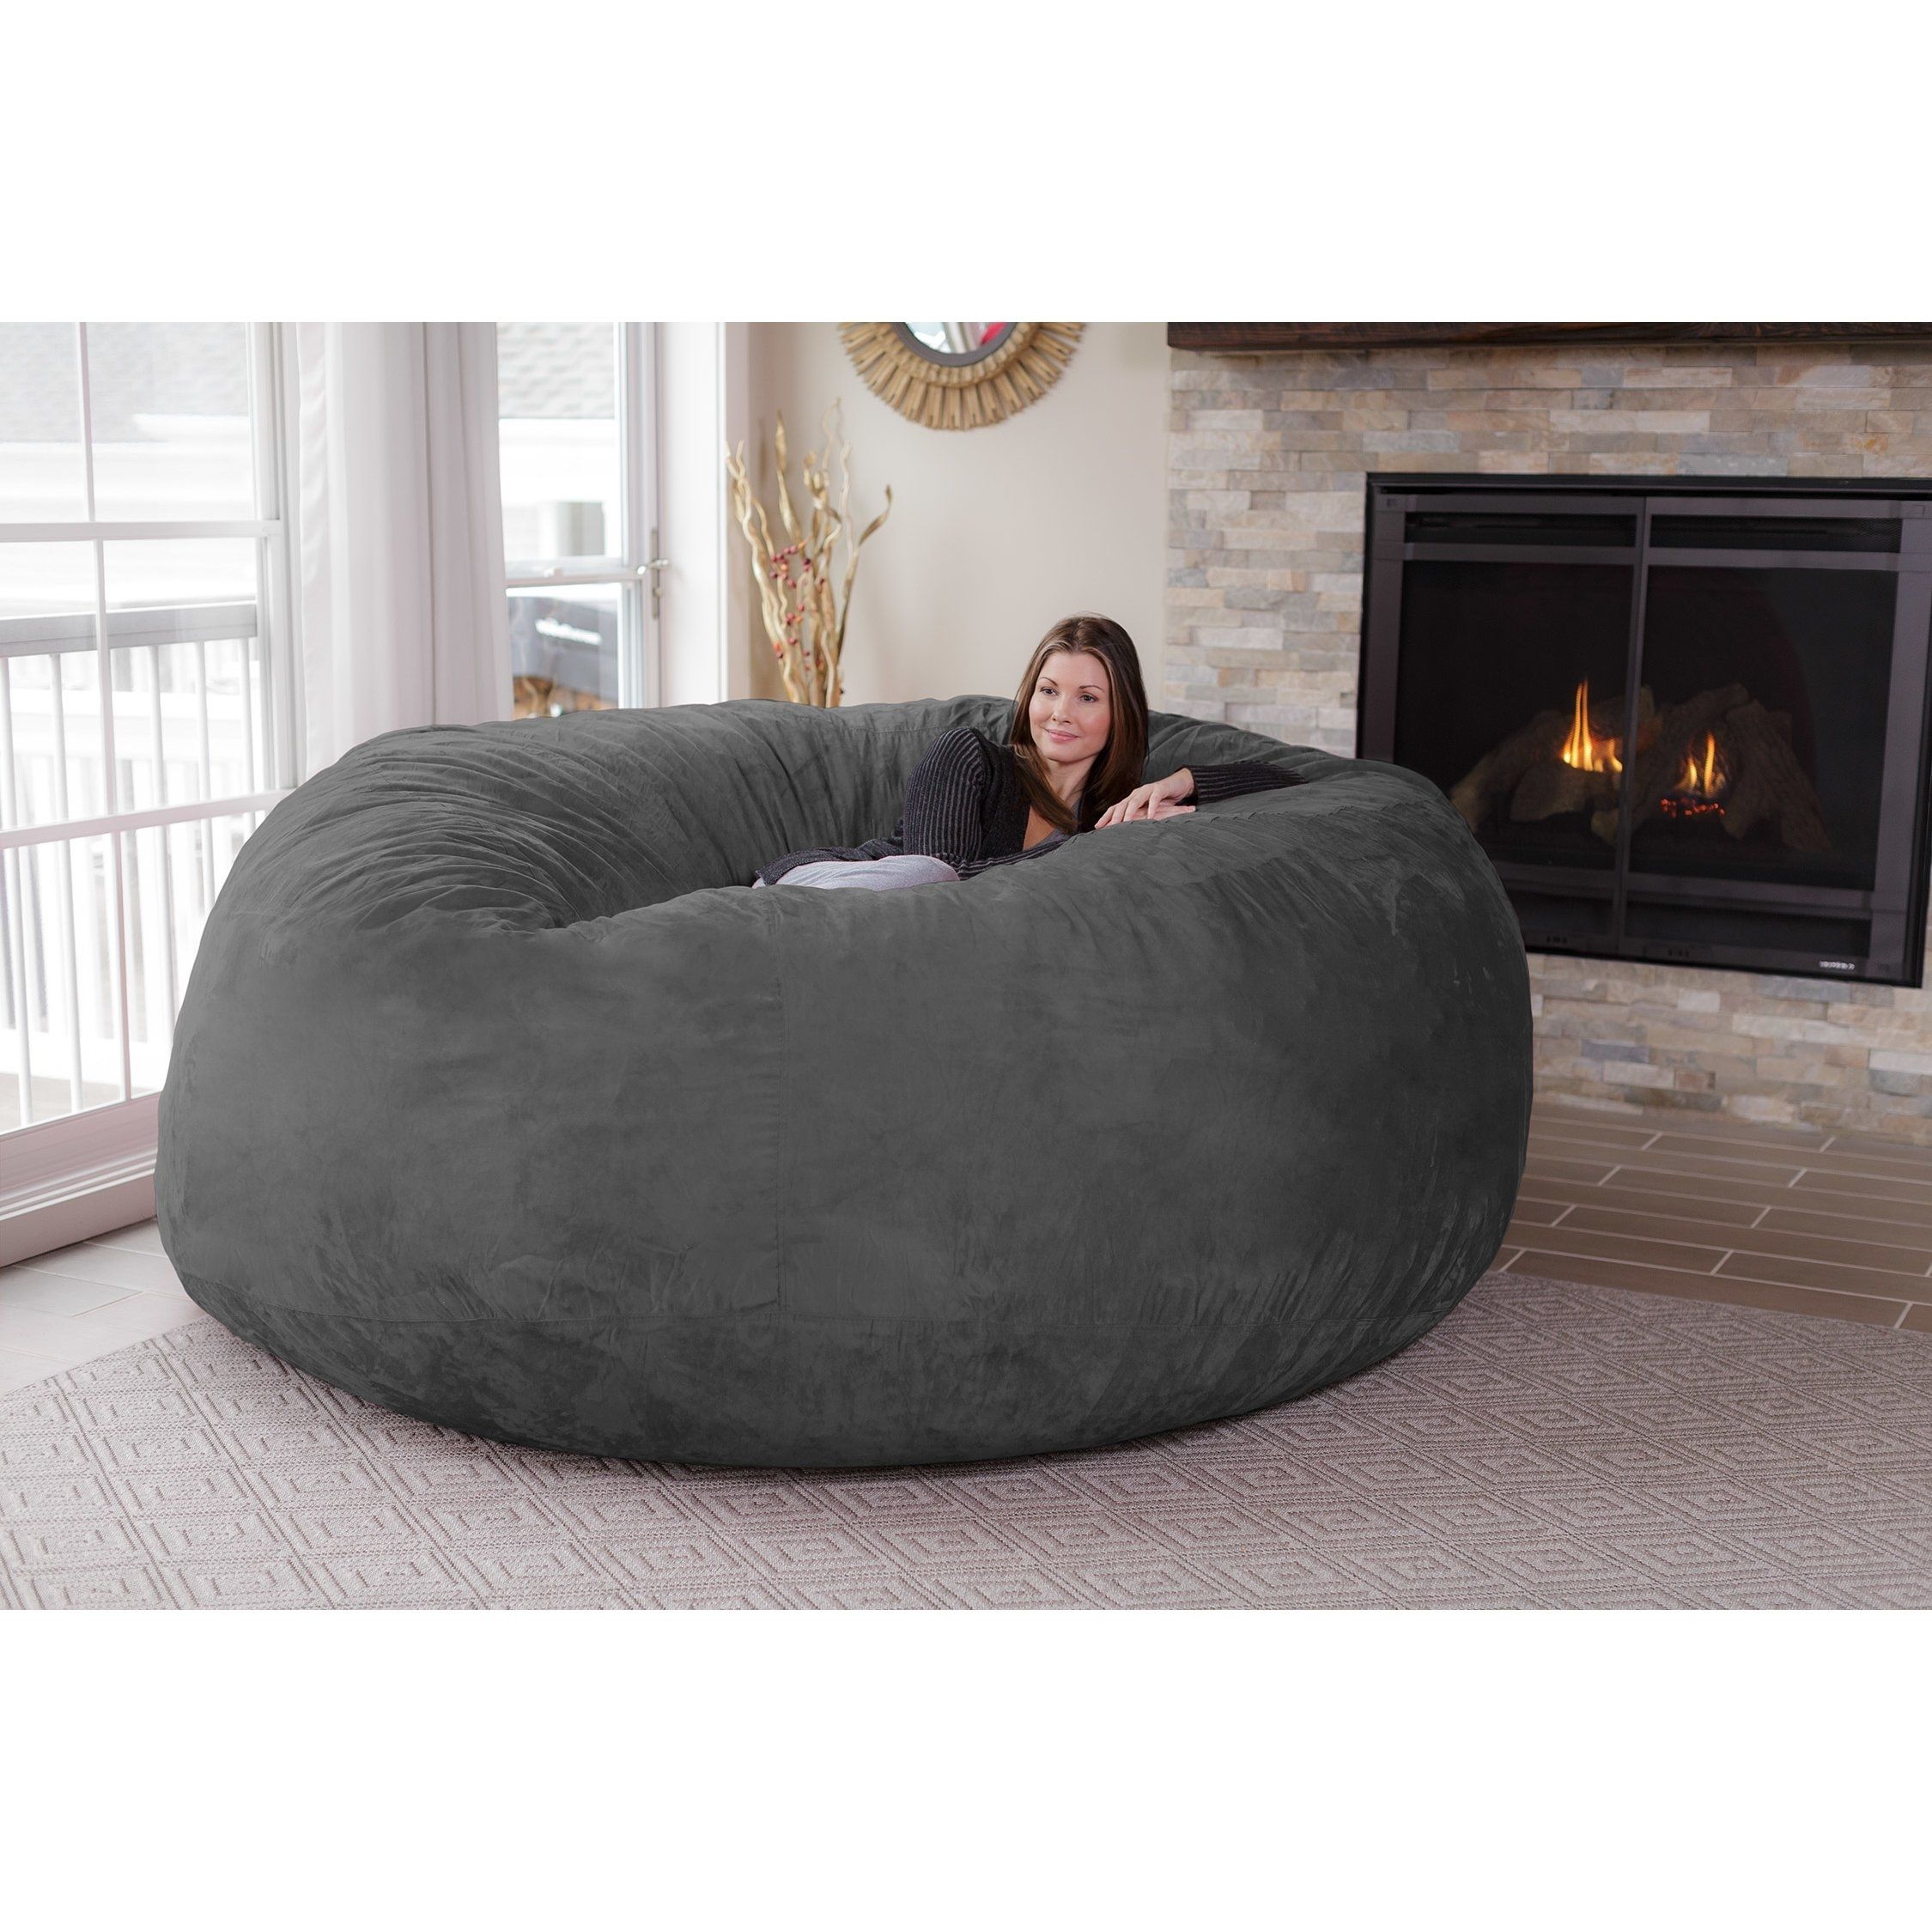 Awesome Bean Bag Couch 22 In Sofas And Couches Set With Bean Bag Couch With Regard To Bean Bag Sofas (View 8 of 10)